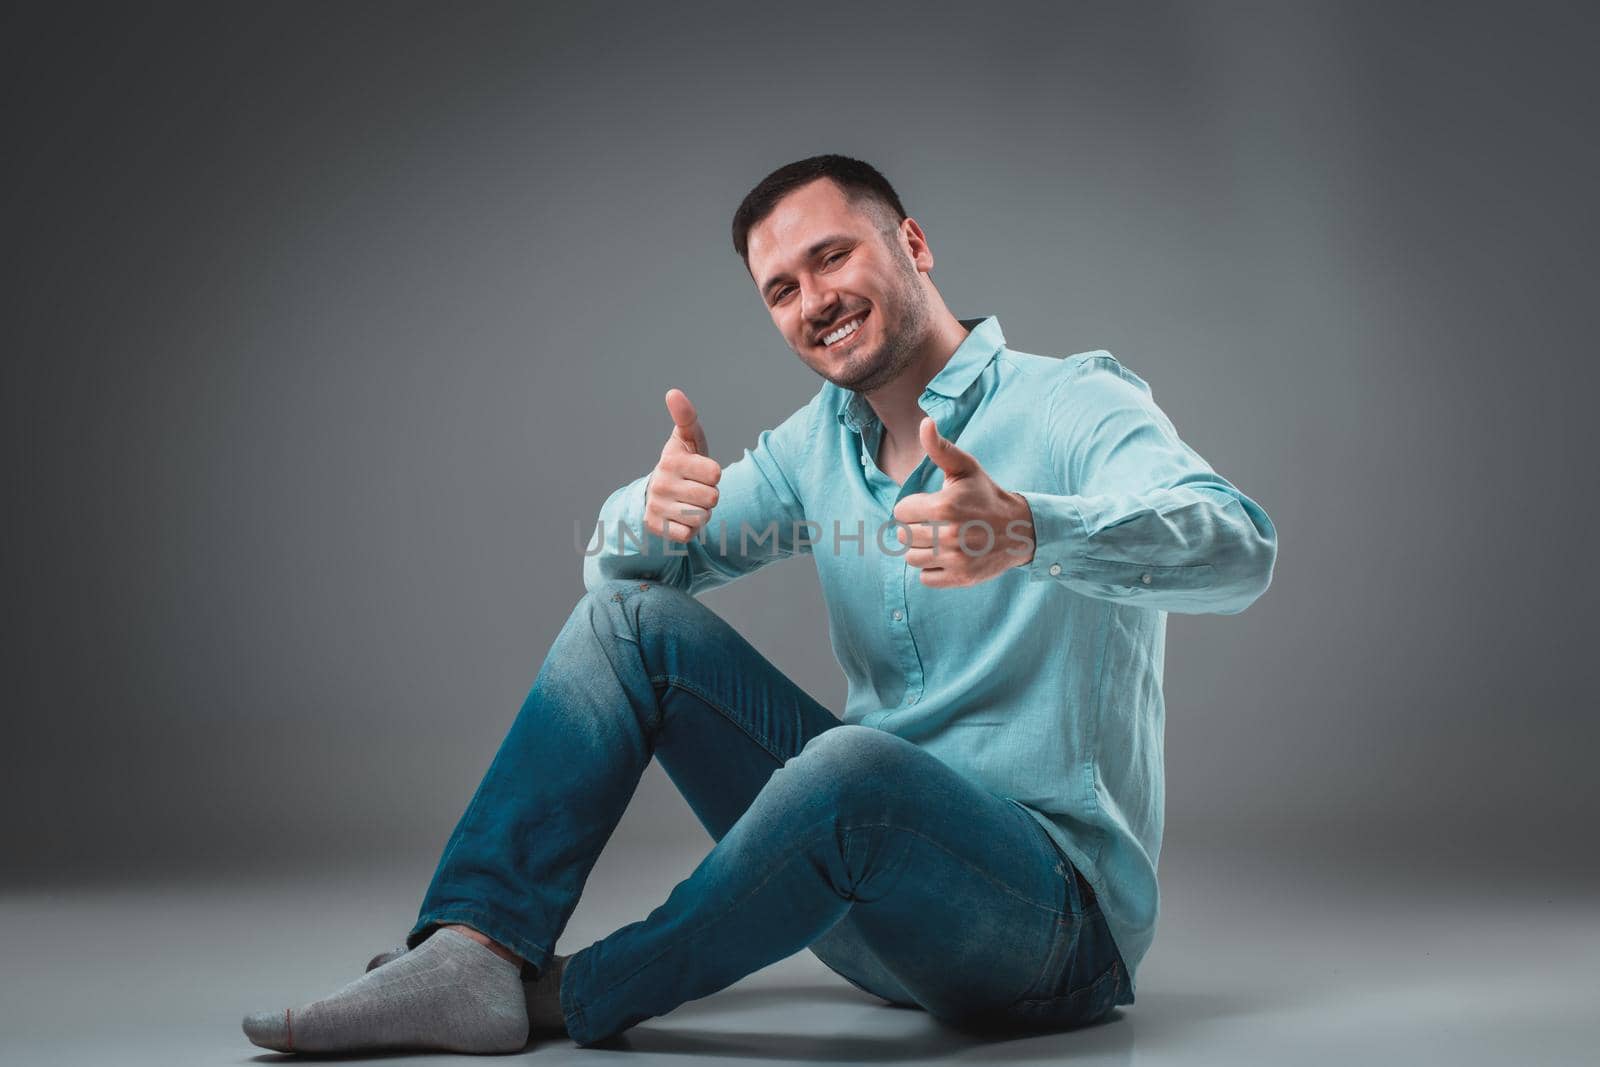 Handsome young man sitting on a floor with raised hands gesturing happiness on gray background. A man in jeans and a blue shirt